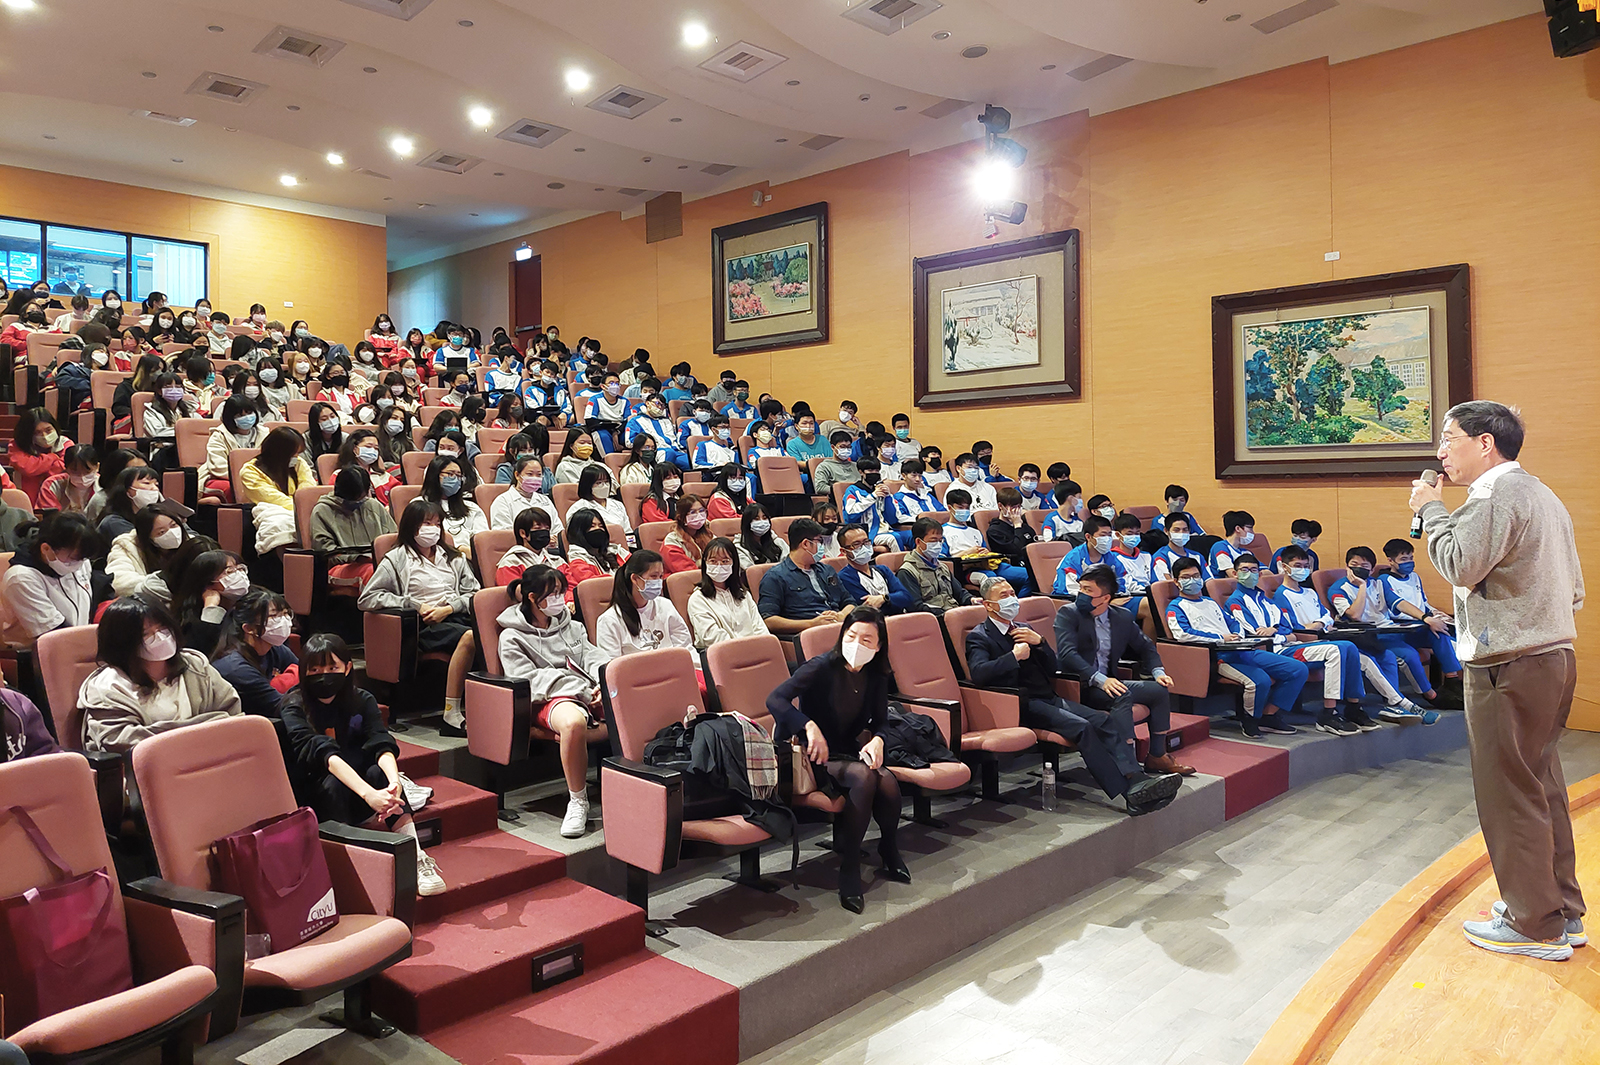 President Kuo shared his insights with students from National Hualien Girls' Senior High School of Taiwan.